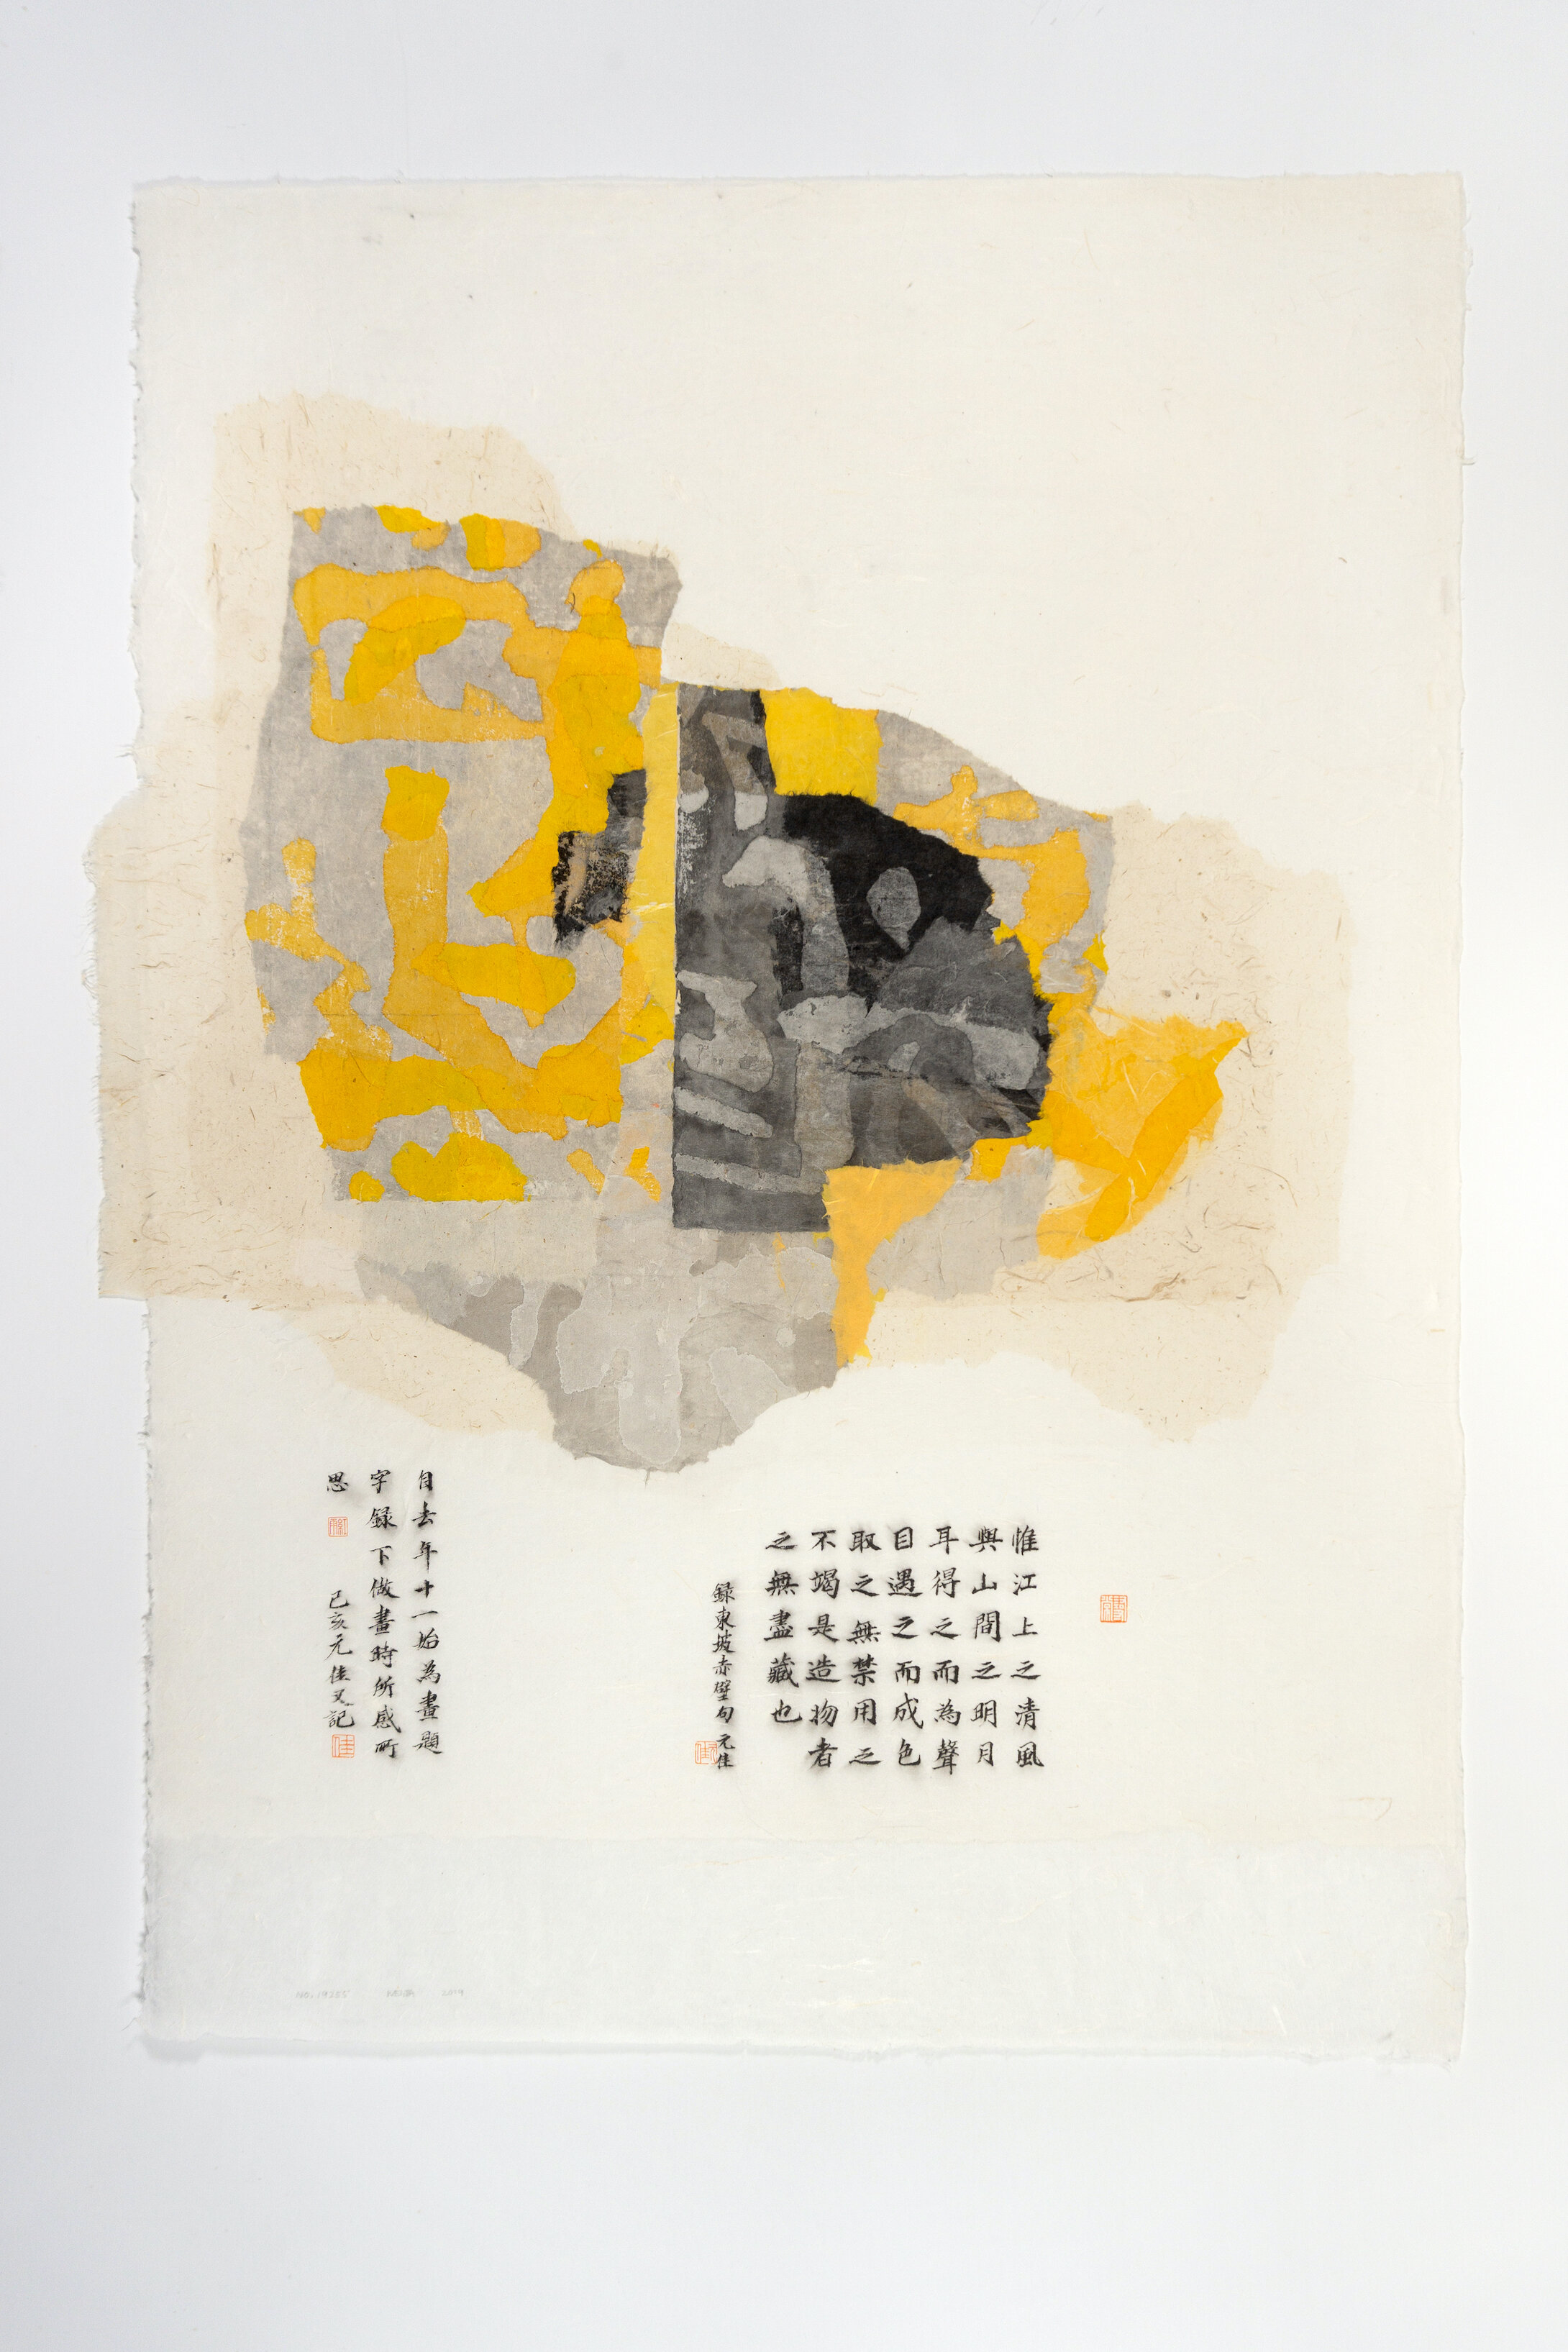  Wei Jia,  No. 19255,  2019. Gouache, ink and Xuan paper, collage on paper, 38 1/4 x 28 1/4 inches ©Wei Jia, courtesy Fou Gallery 